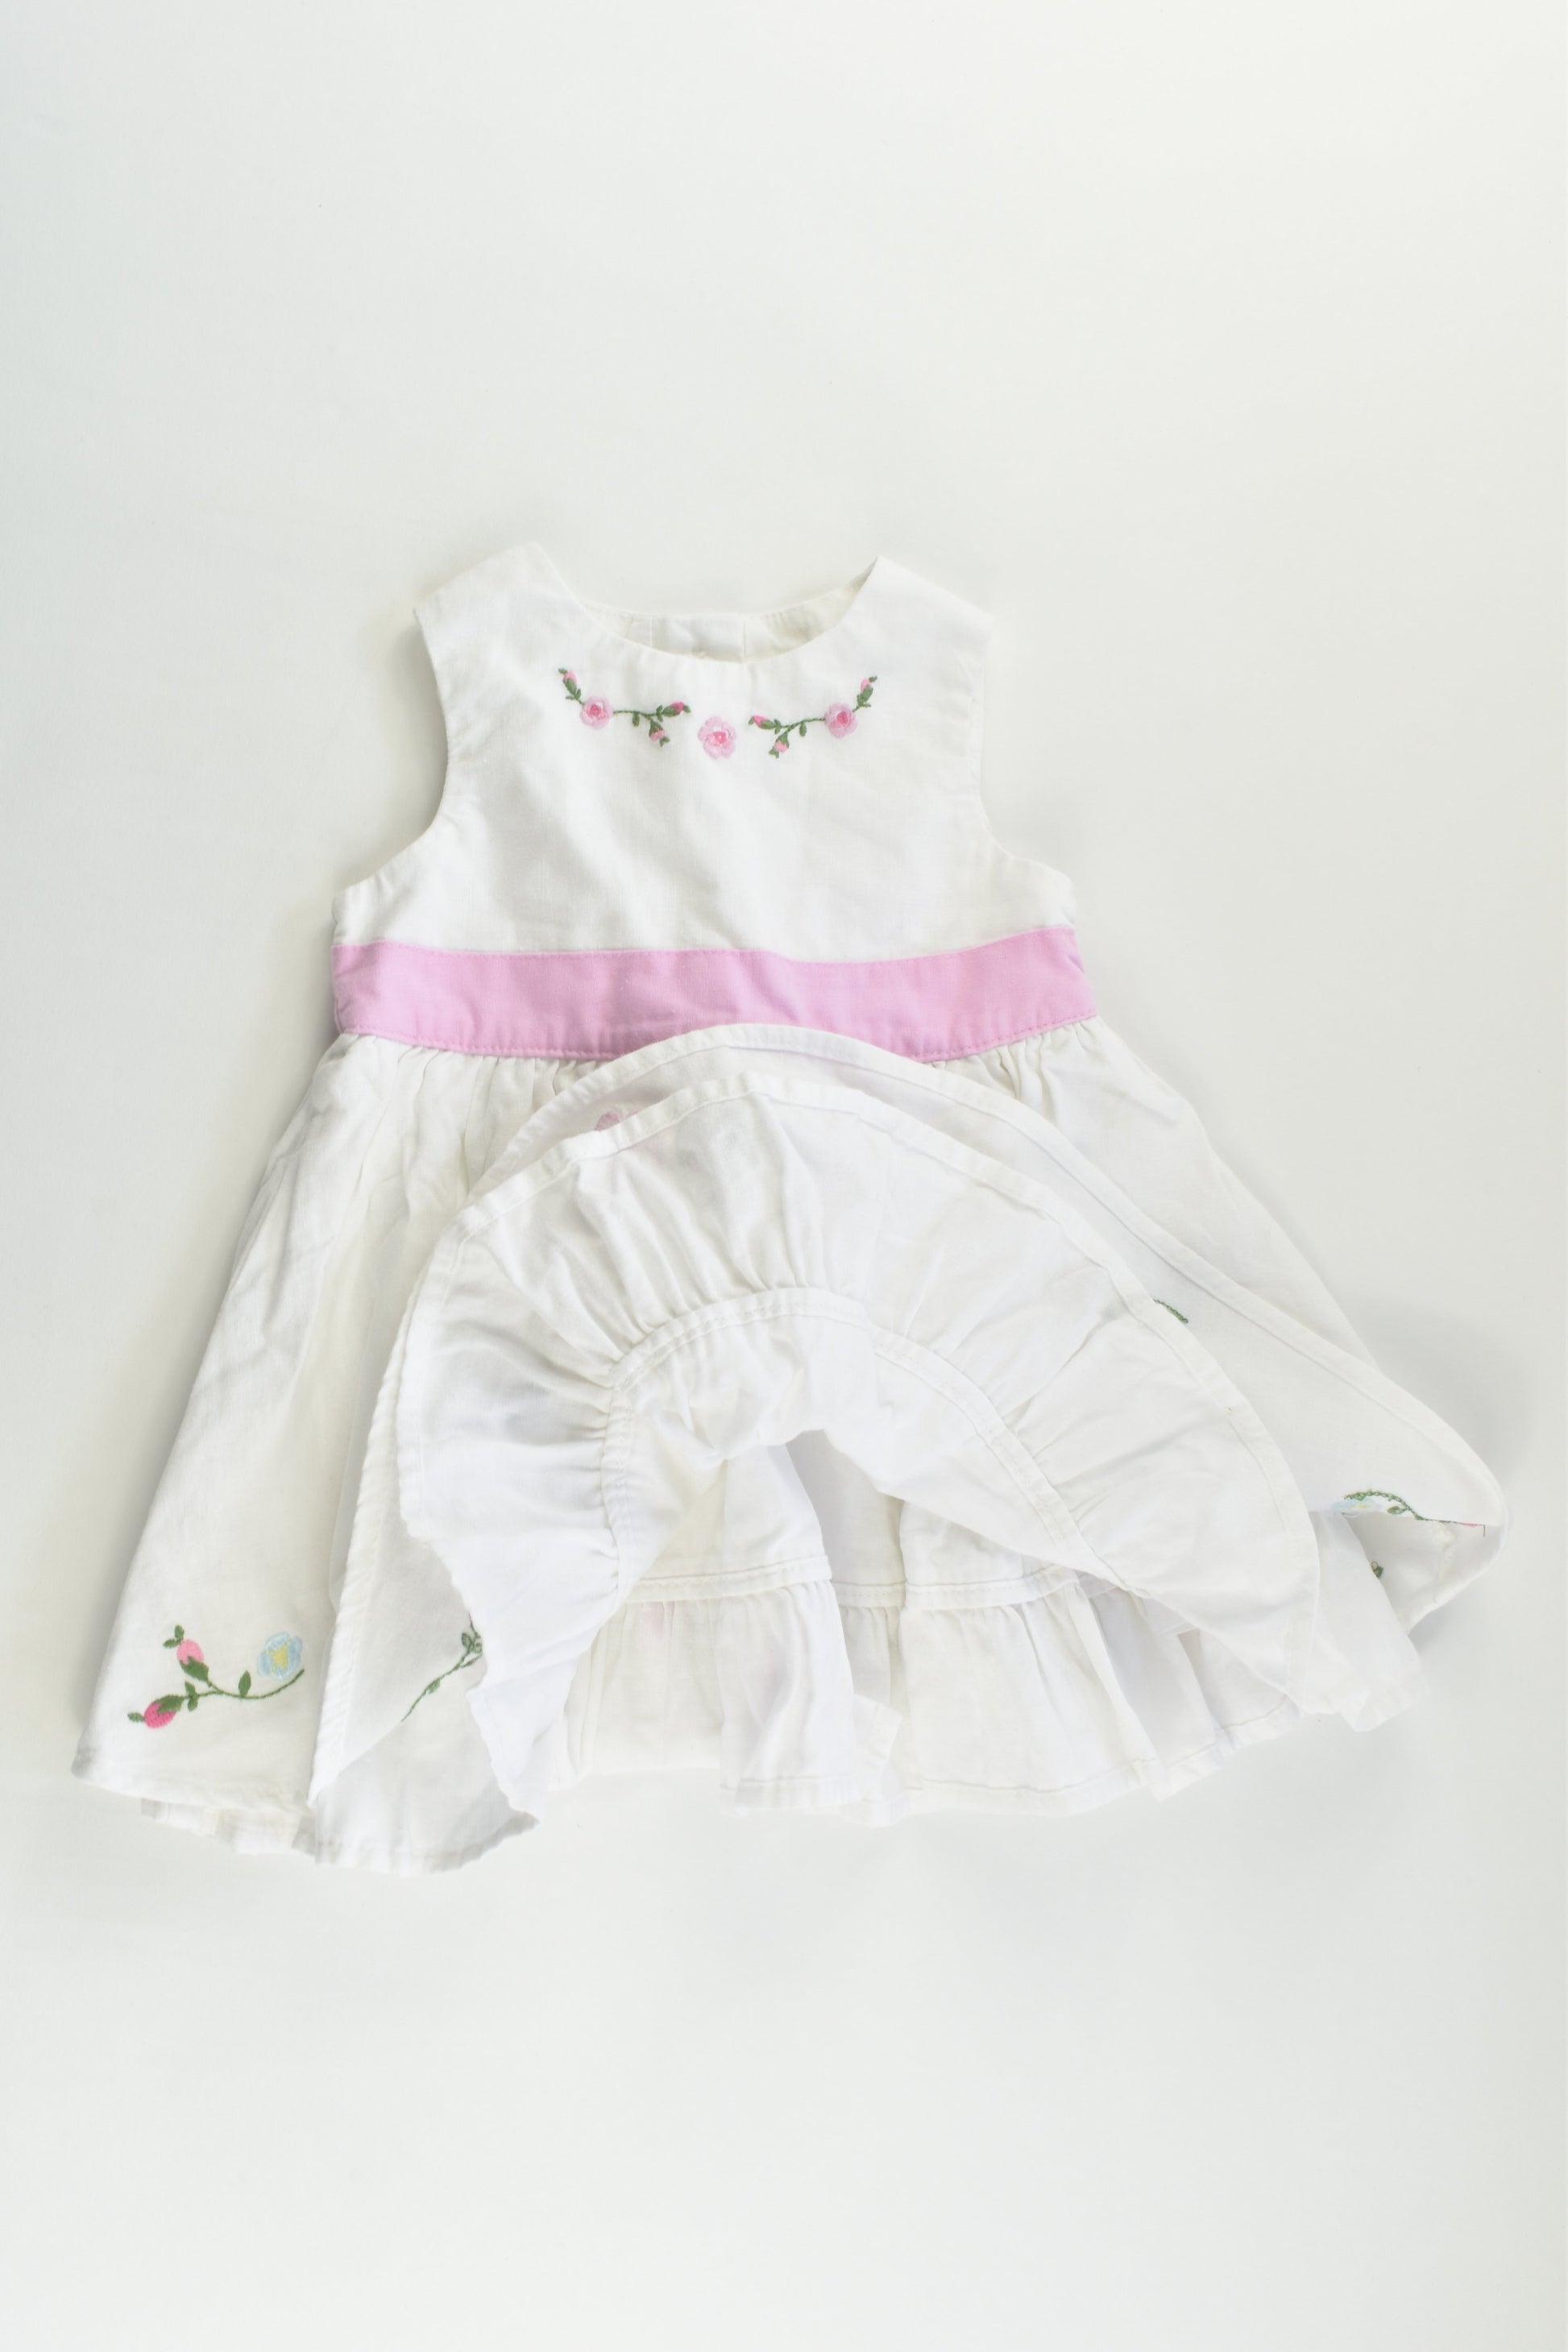 Mothercare Size 00 (3-6 months) Linen/Cotton Lined Dress and Bloomers